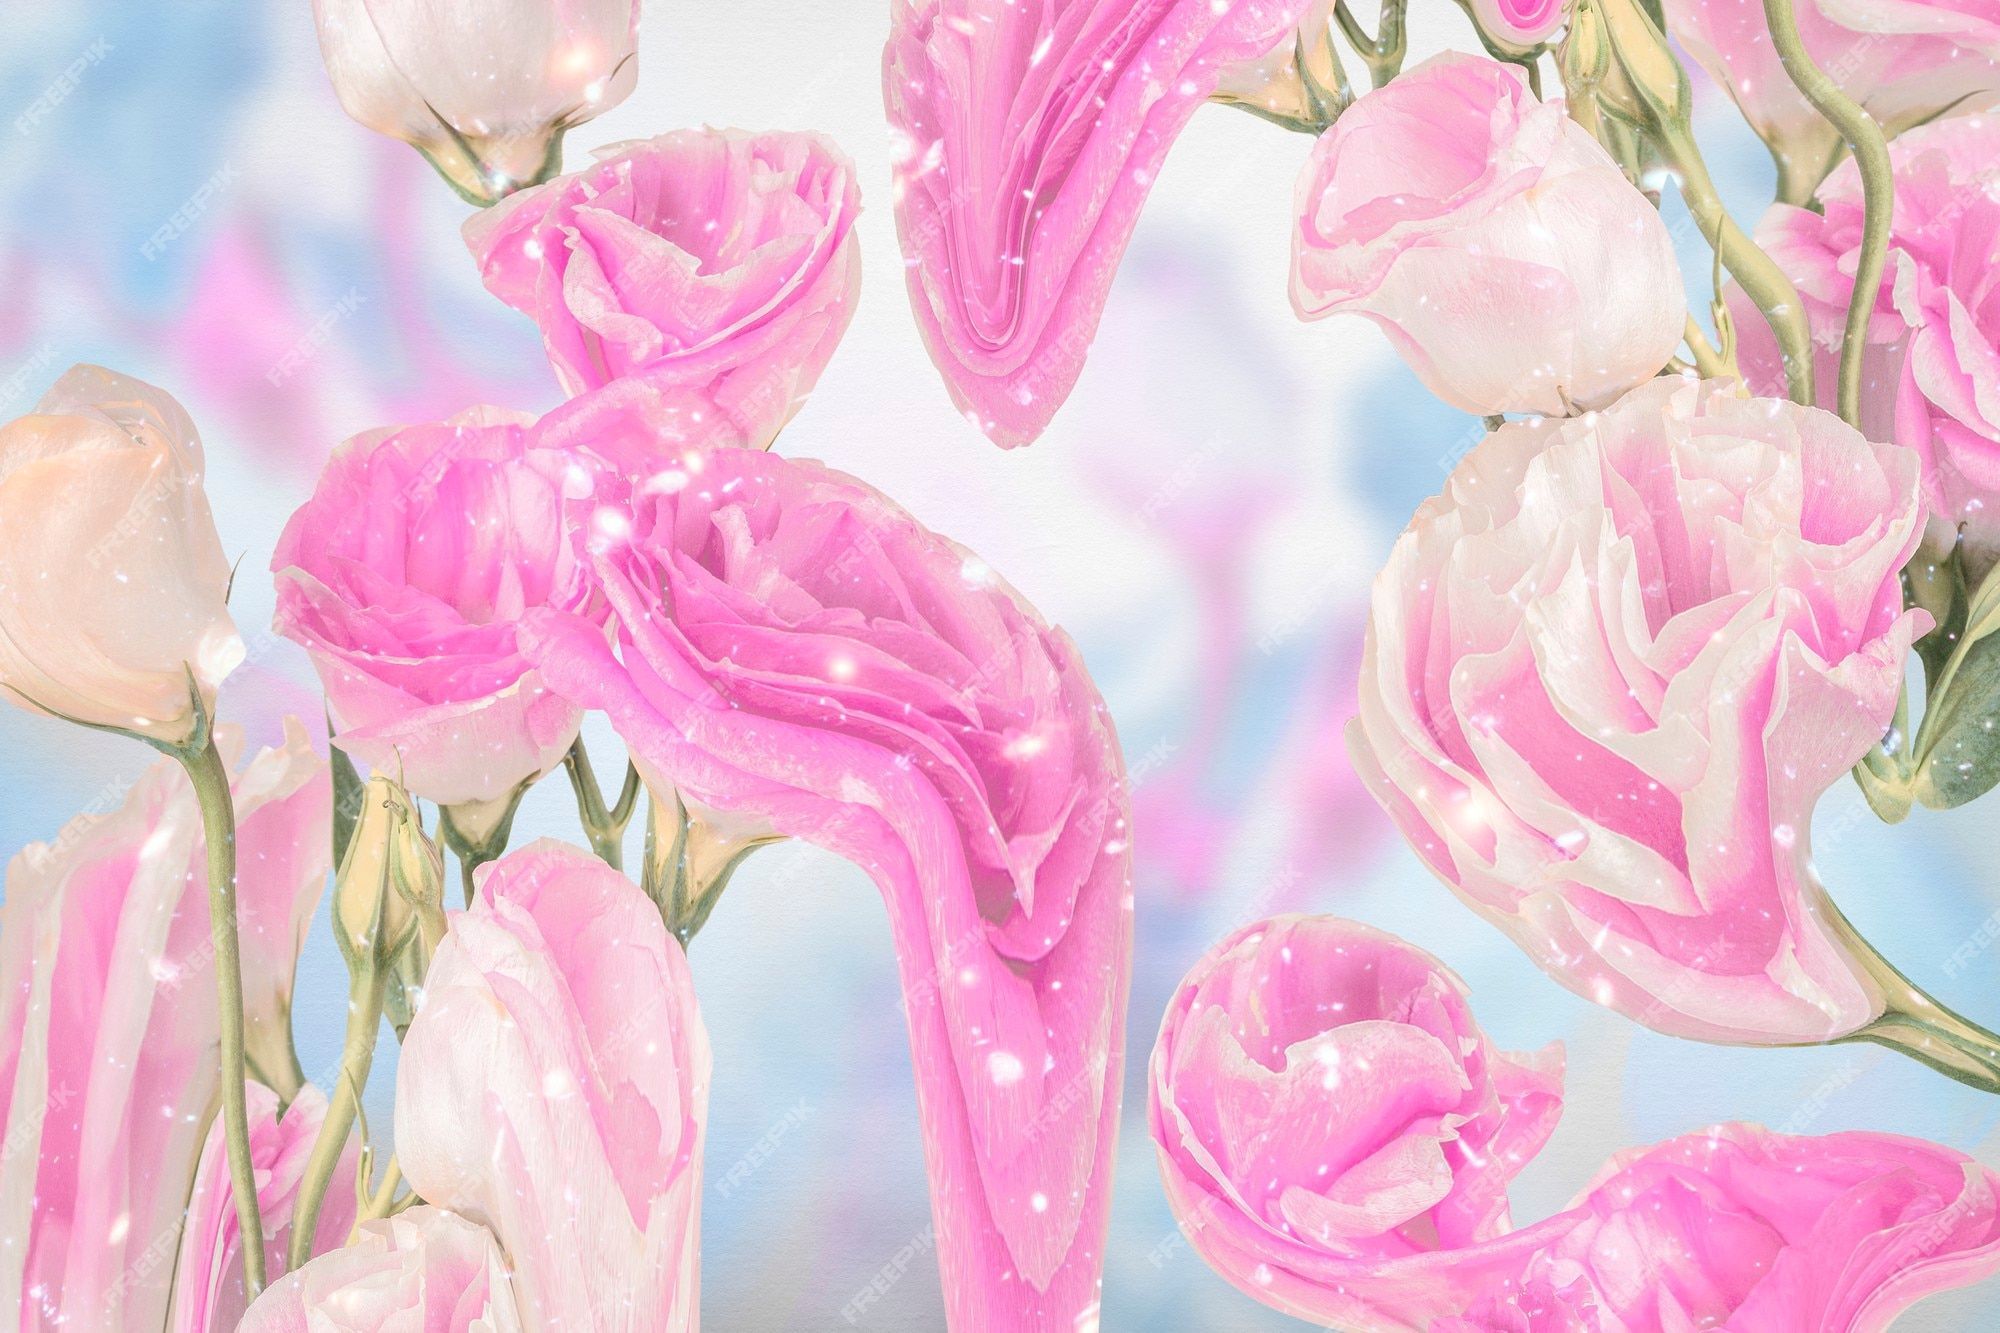 Free Photo. Pink floral background wallpaper, trippy aesthetic design